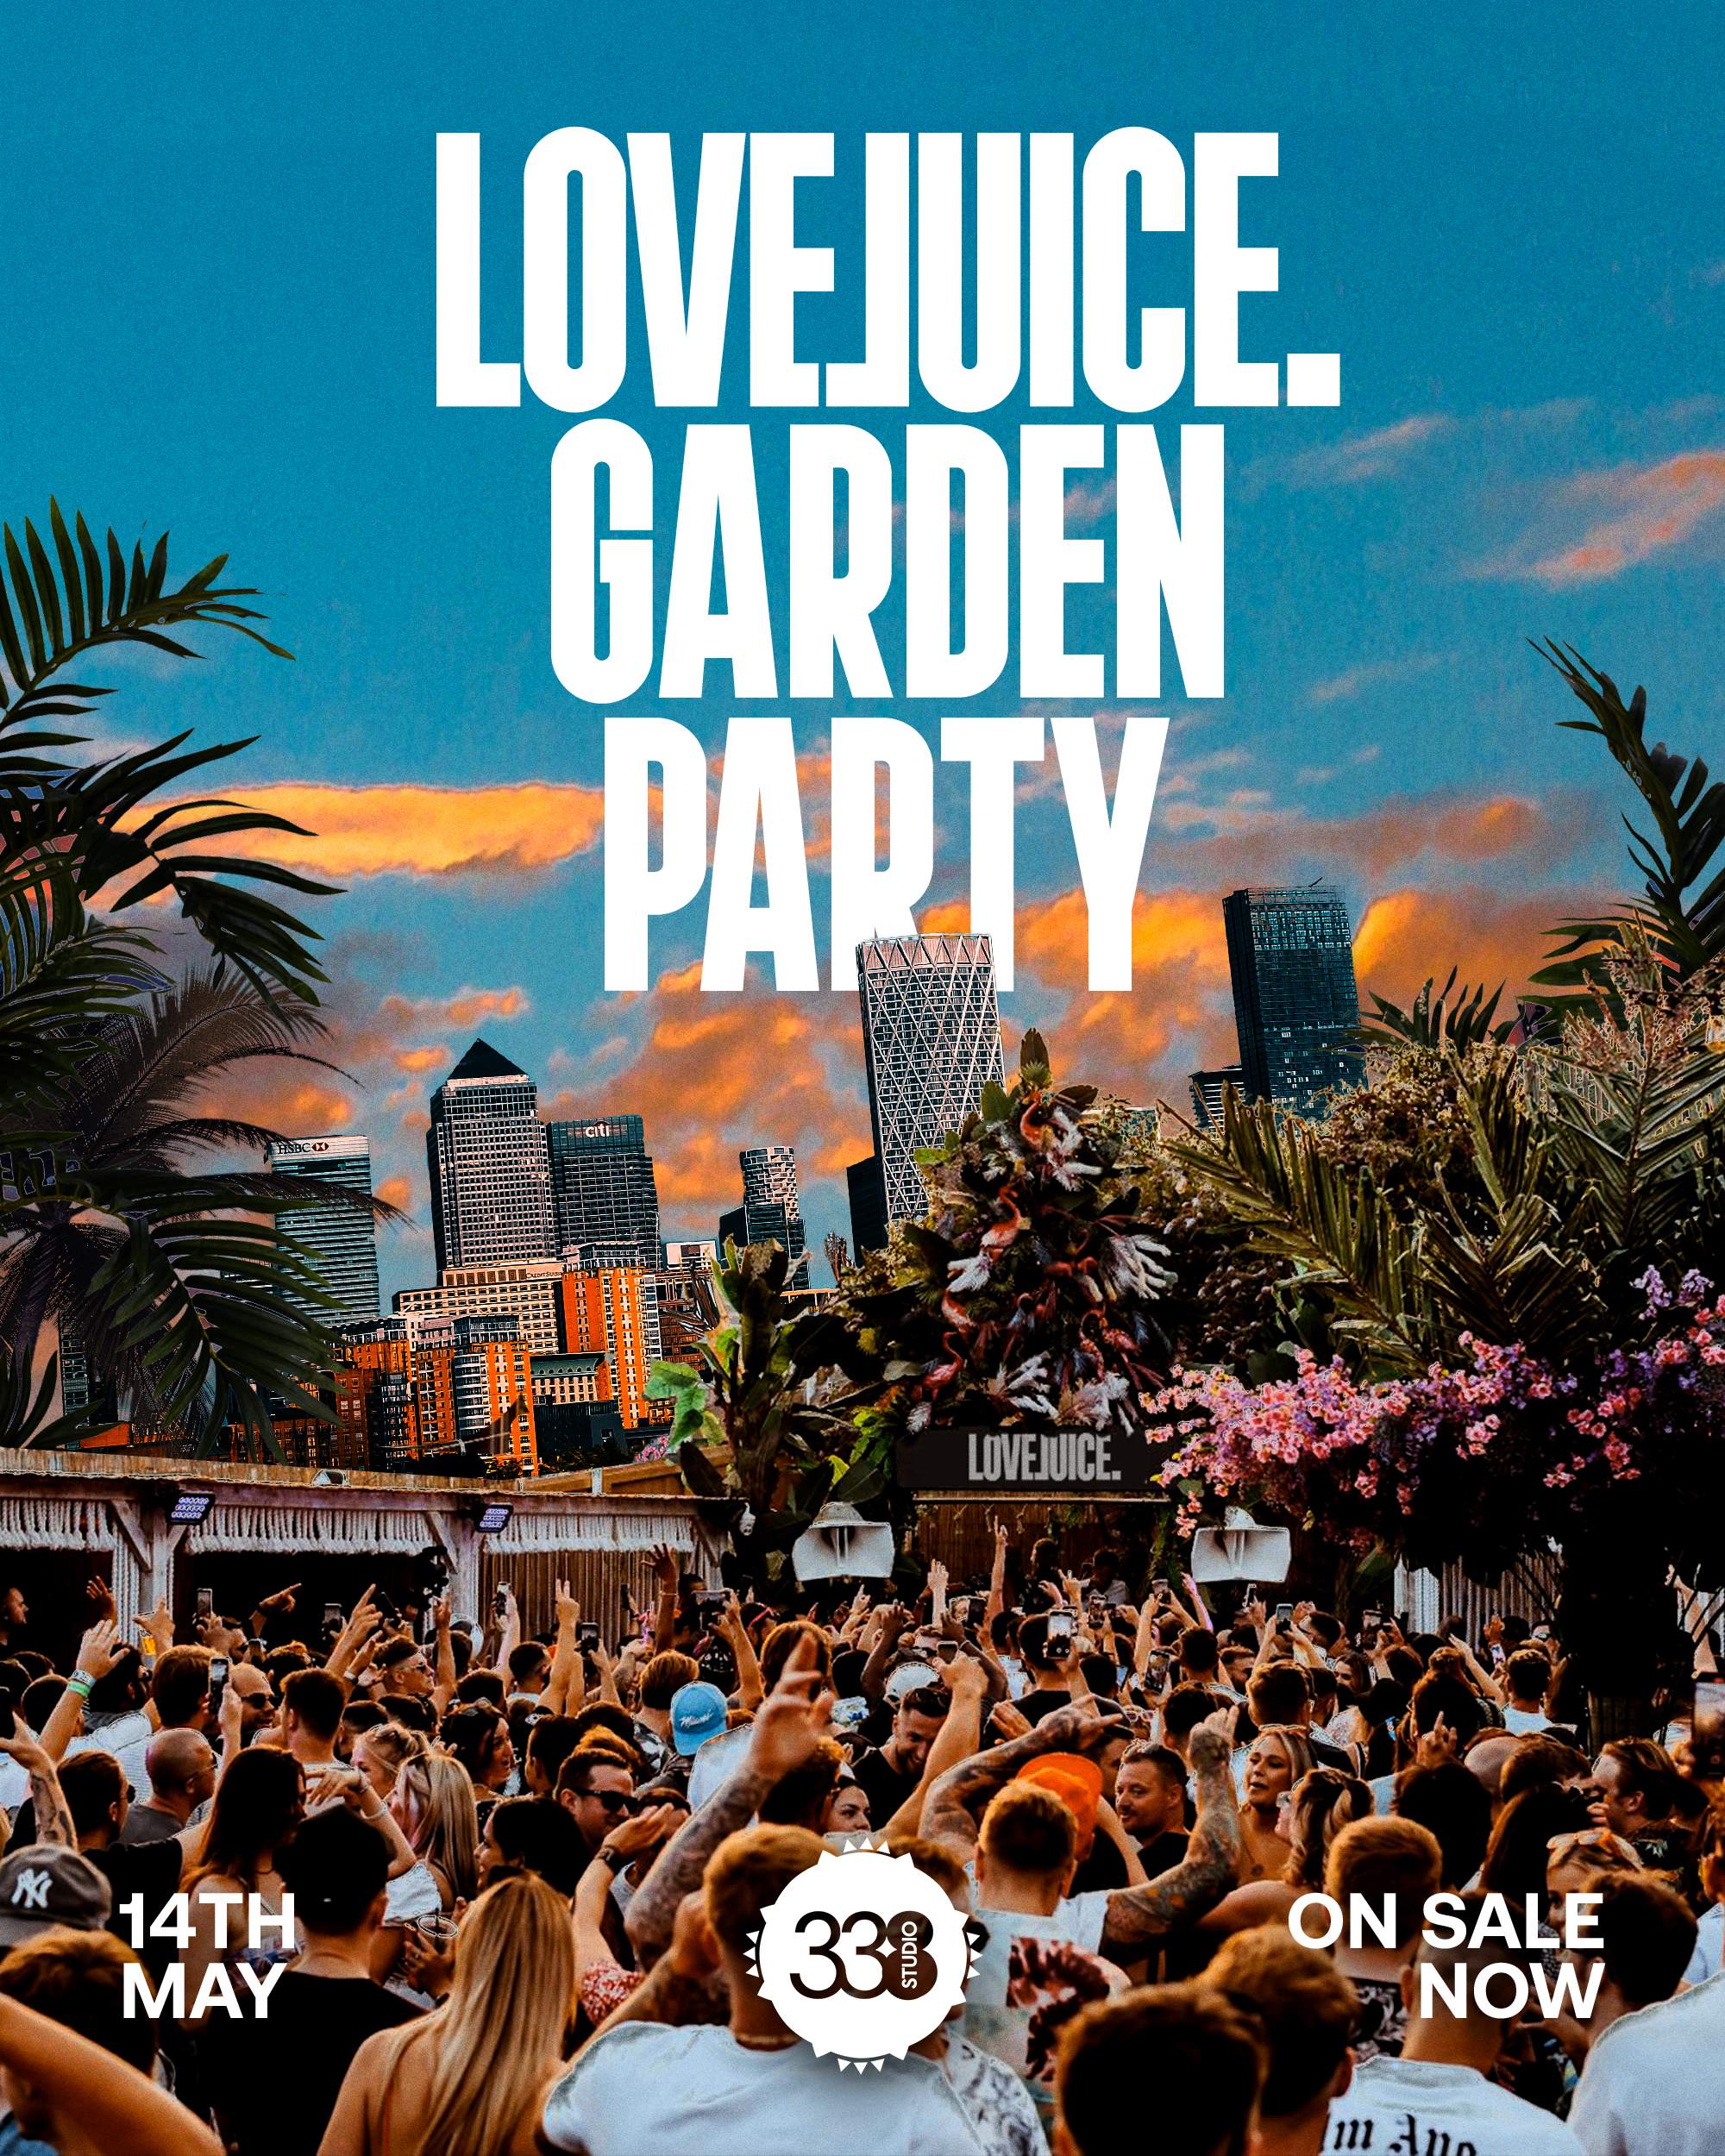 LoveJuice Garden Party at Studio 338 - Sunday 14 May - フライヤー表